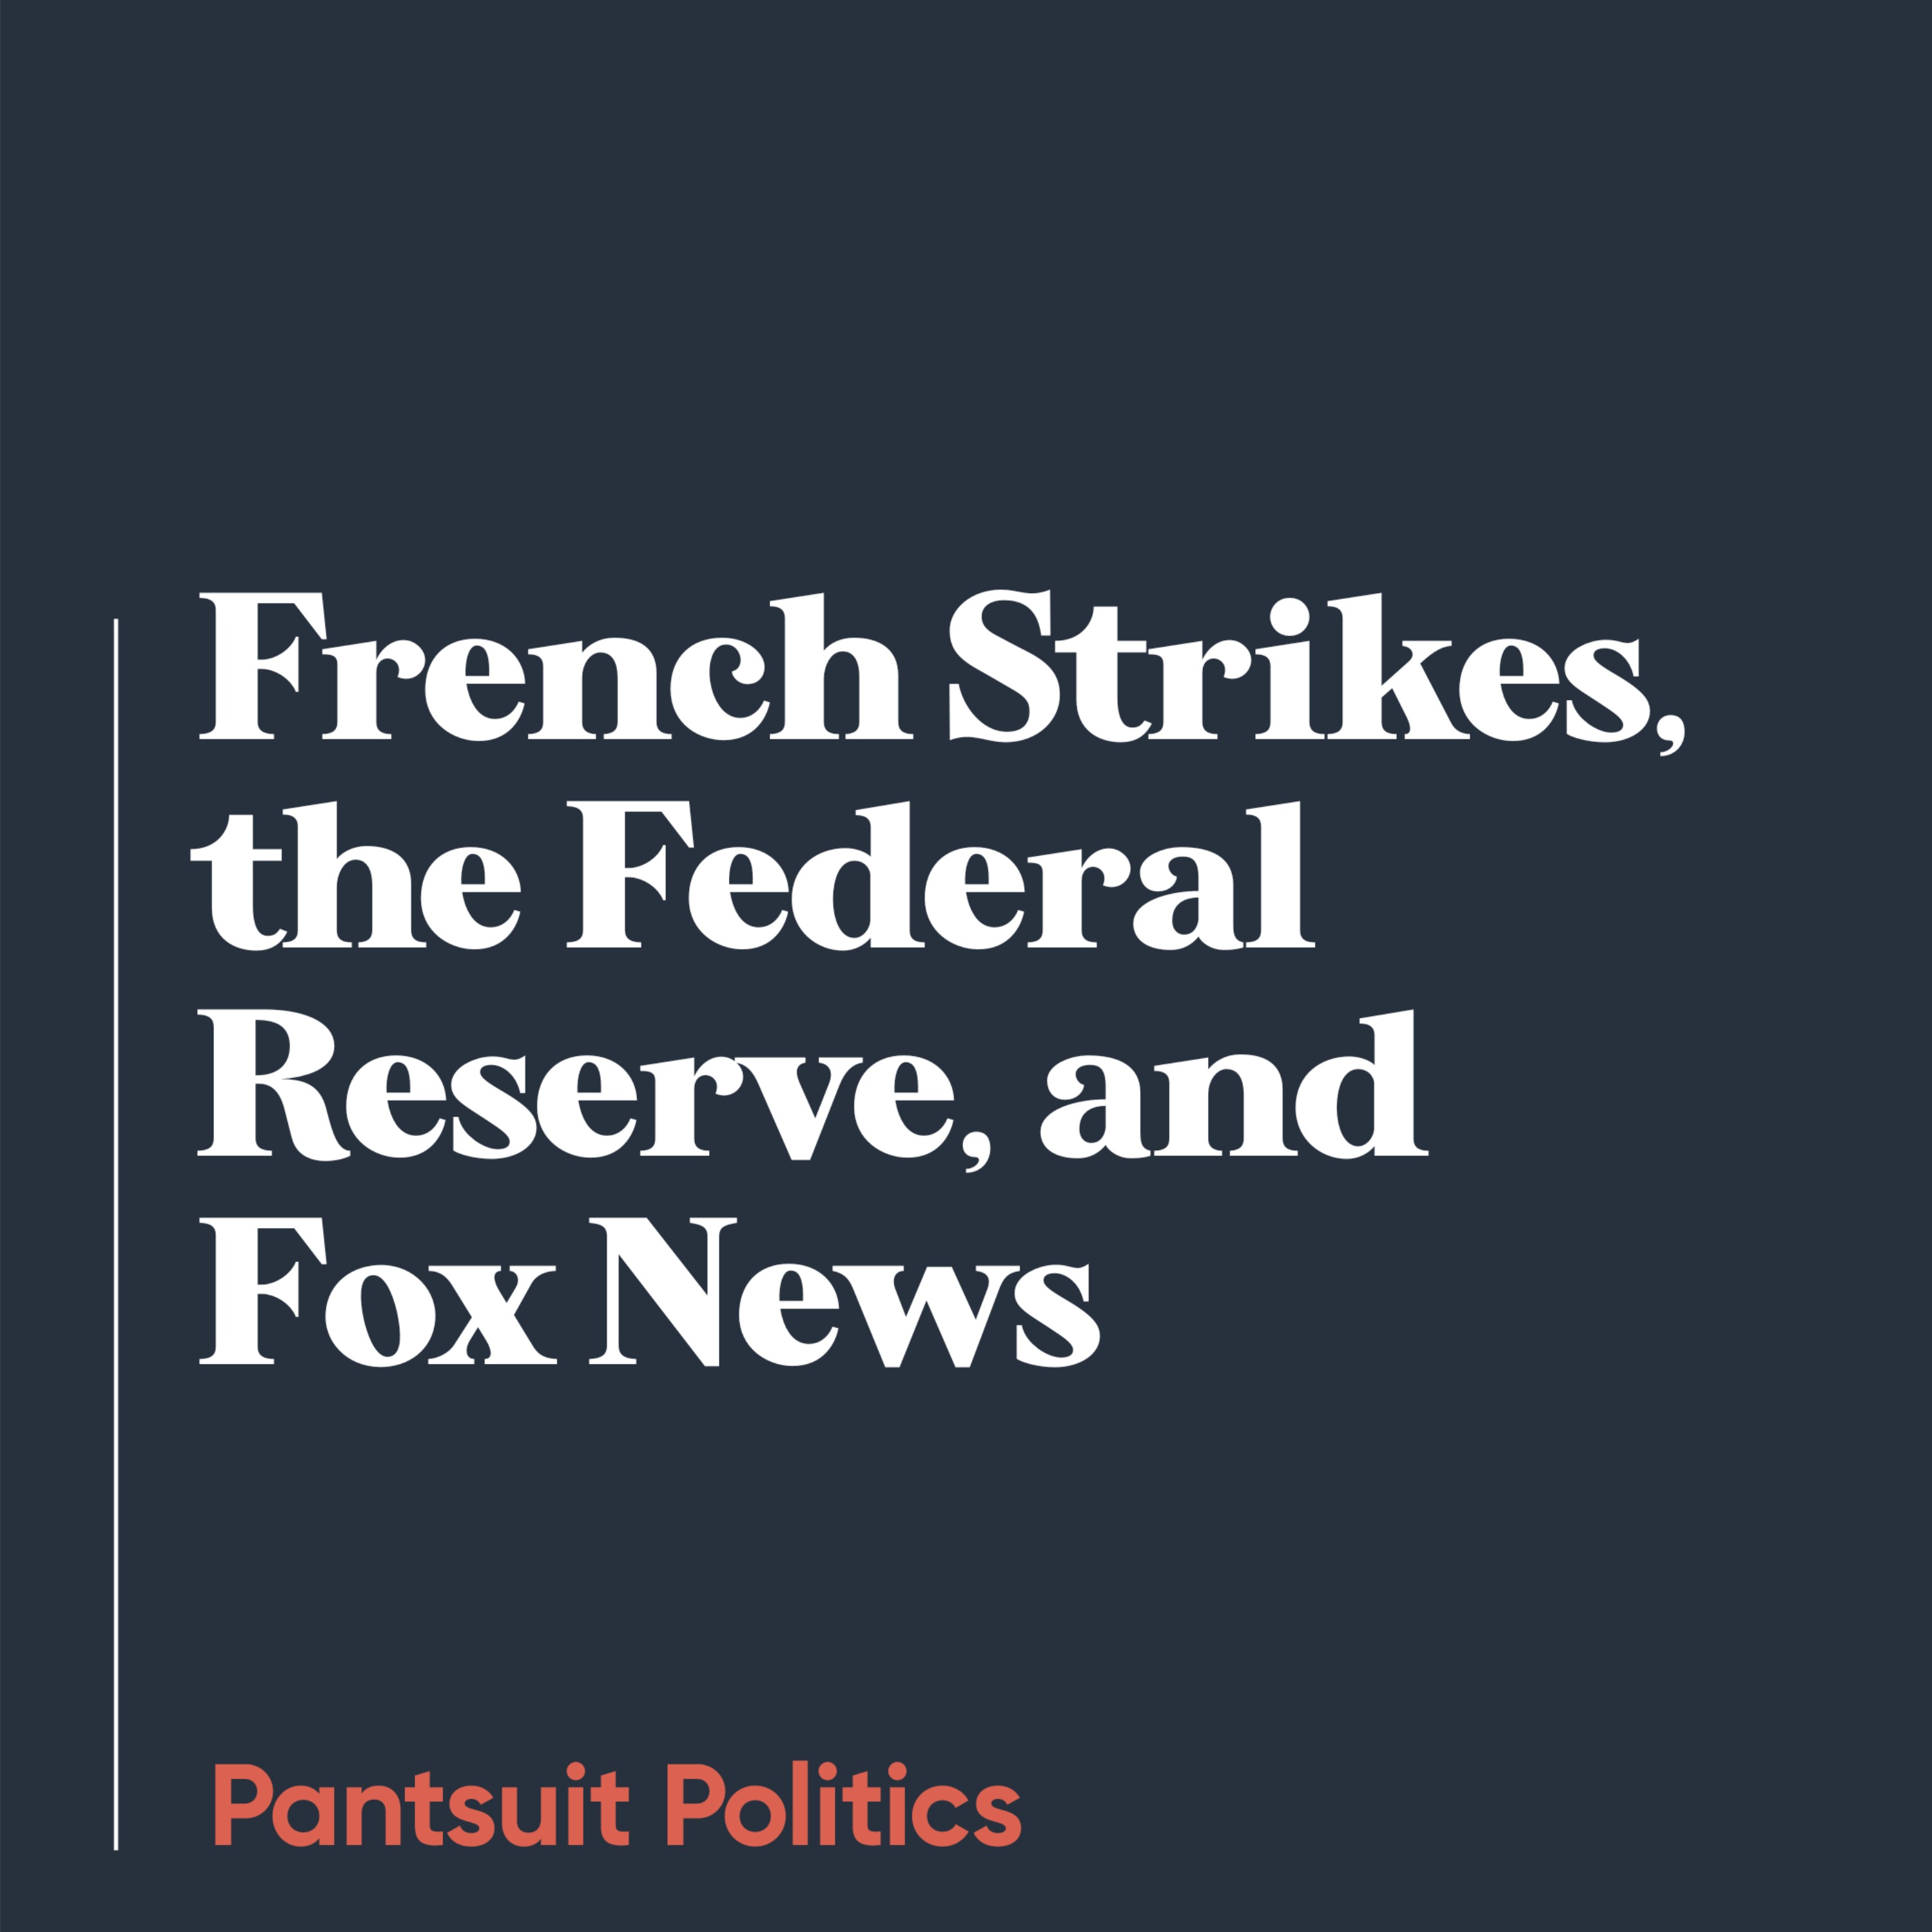 French Strikes, the Federal Reserve, and Fox News